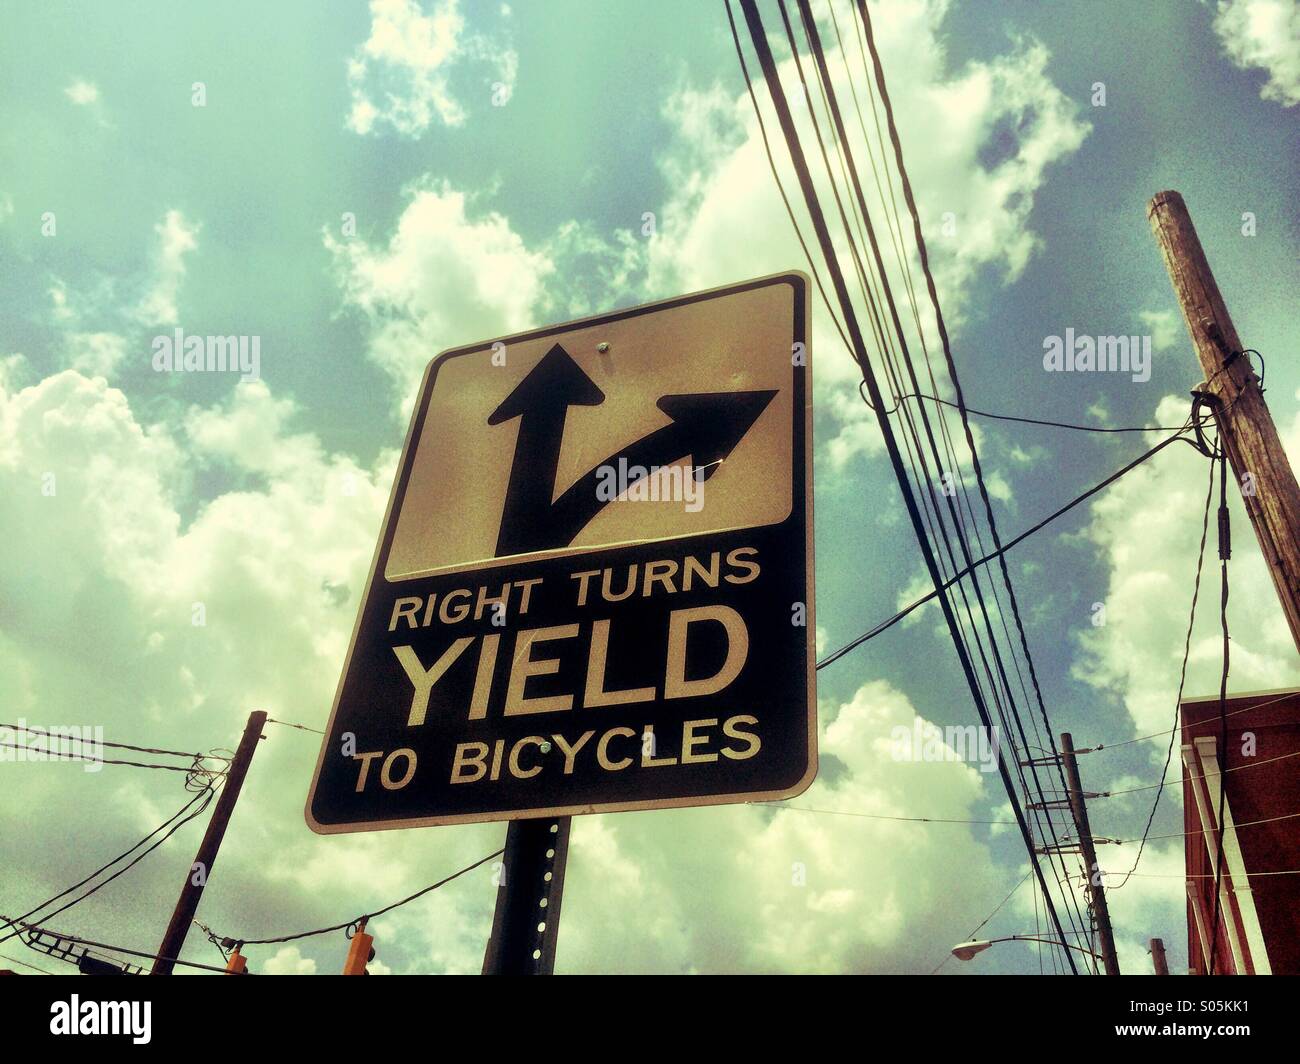 Right Turns Yield To Bicycles road sign. Stock Photo